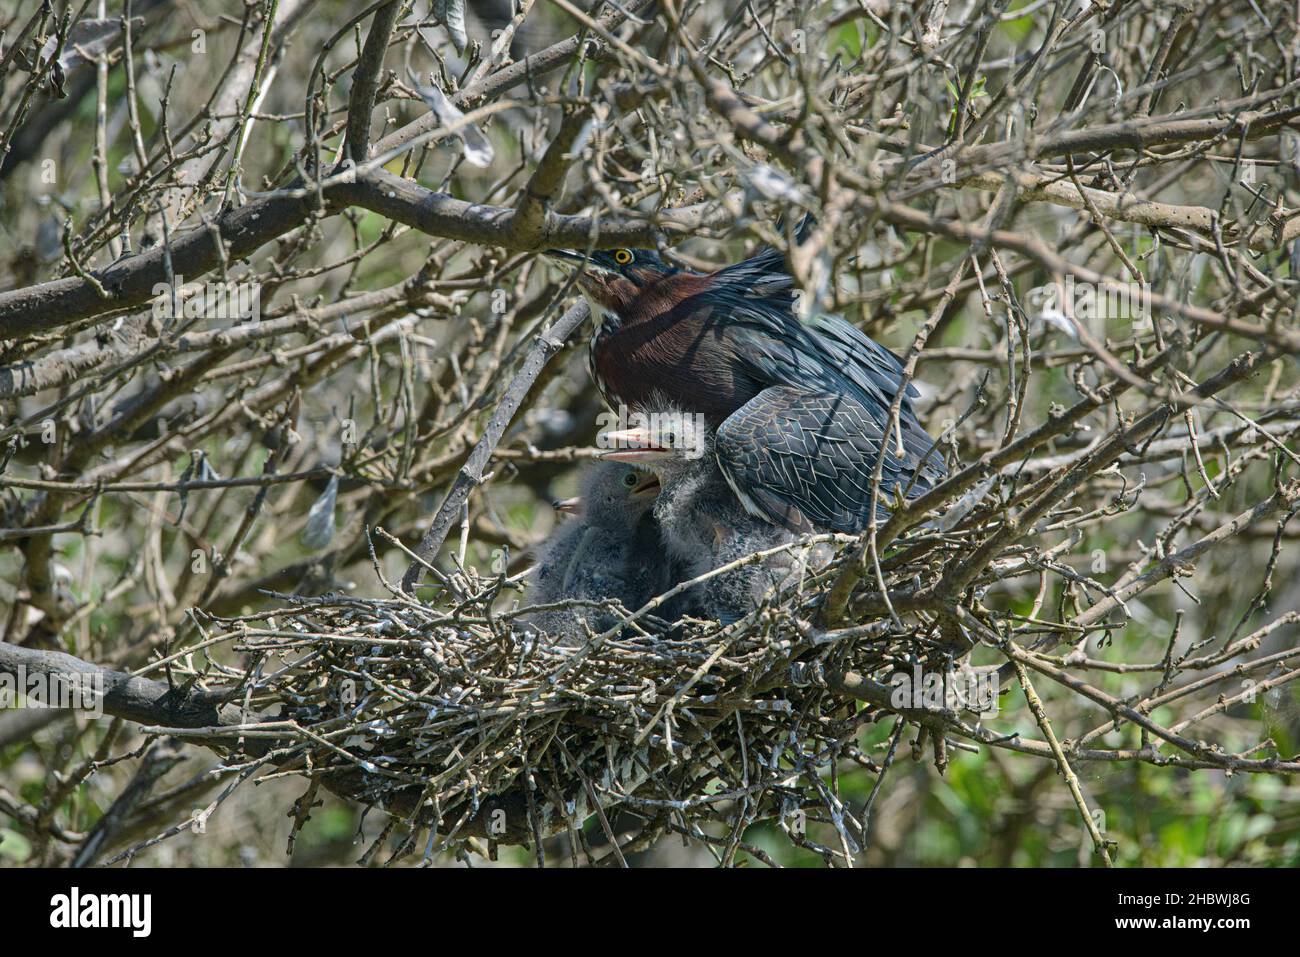 Green Back Heron with baby chicks in nest Stock Photo